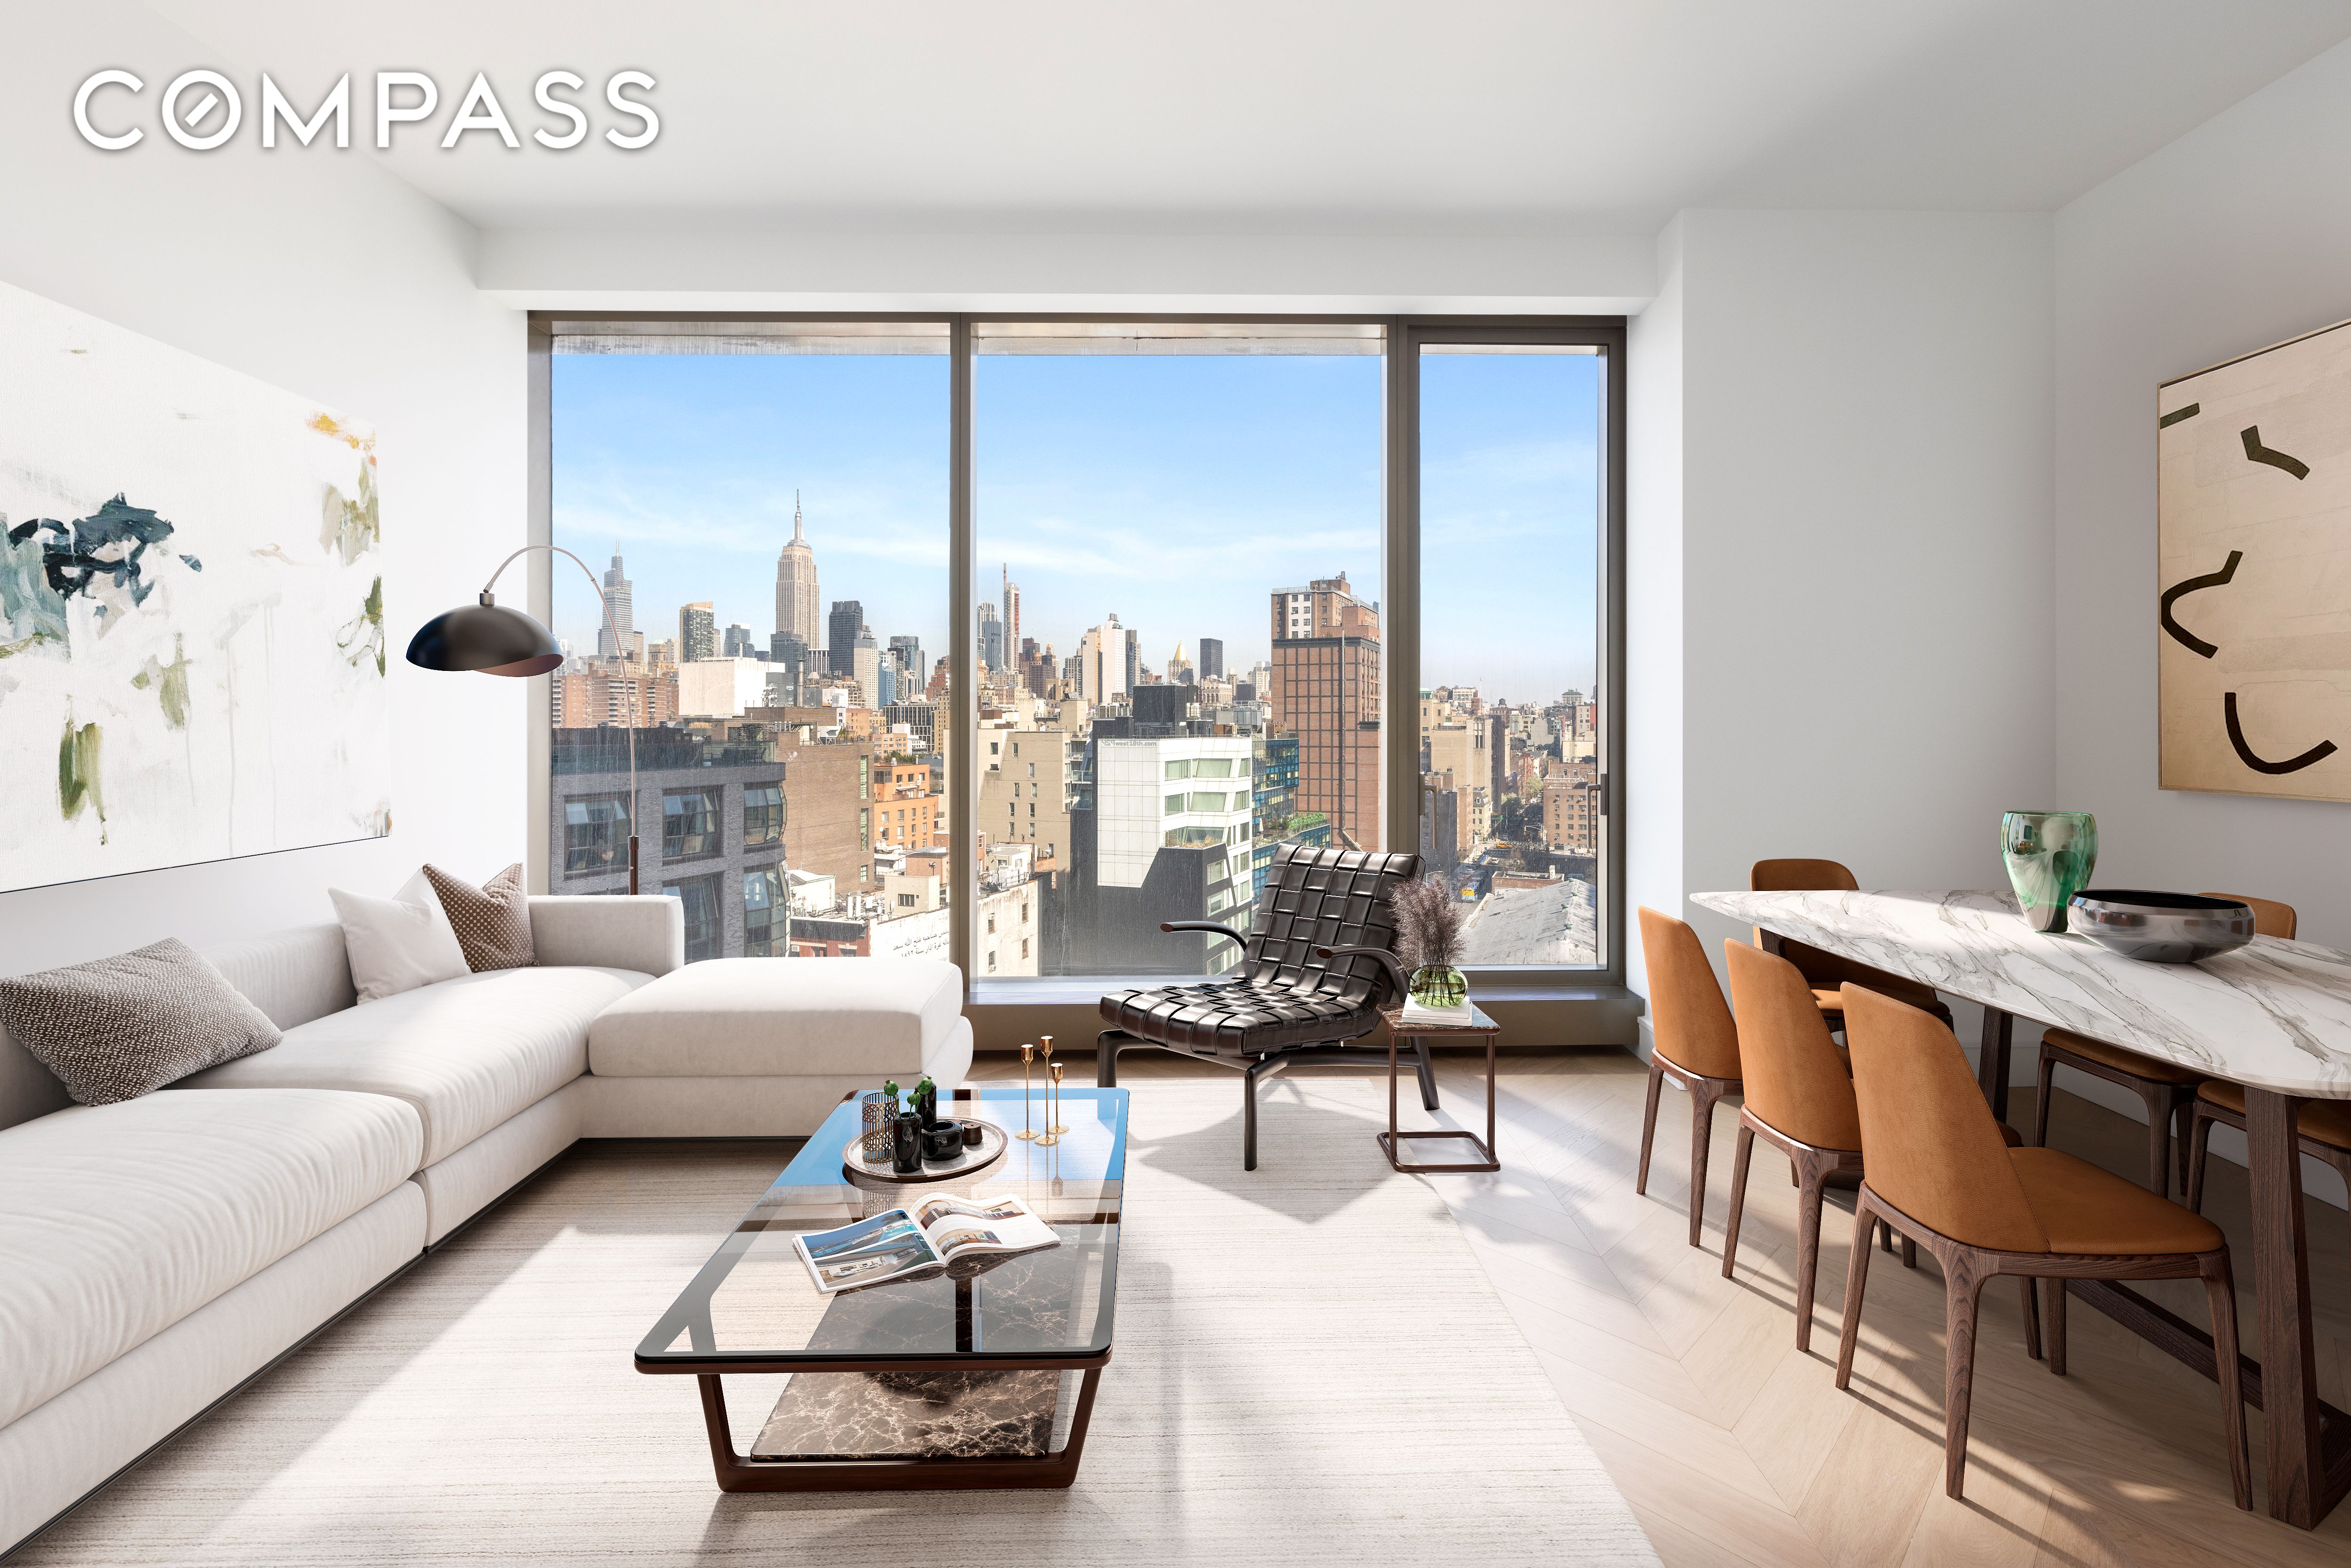 500 West 18th Street 11D, Chelsea, Downtown, NYC - 2 Bedrooms  
2.5 Bathrooms  
4 Rooms - 